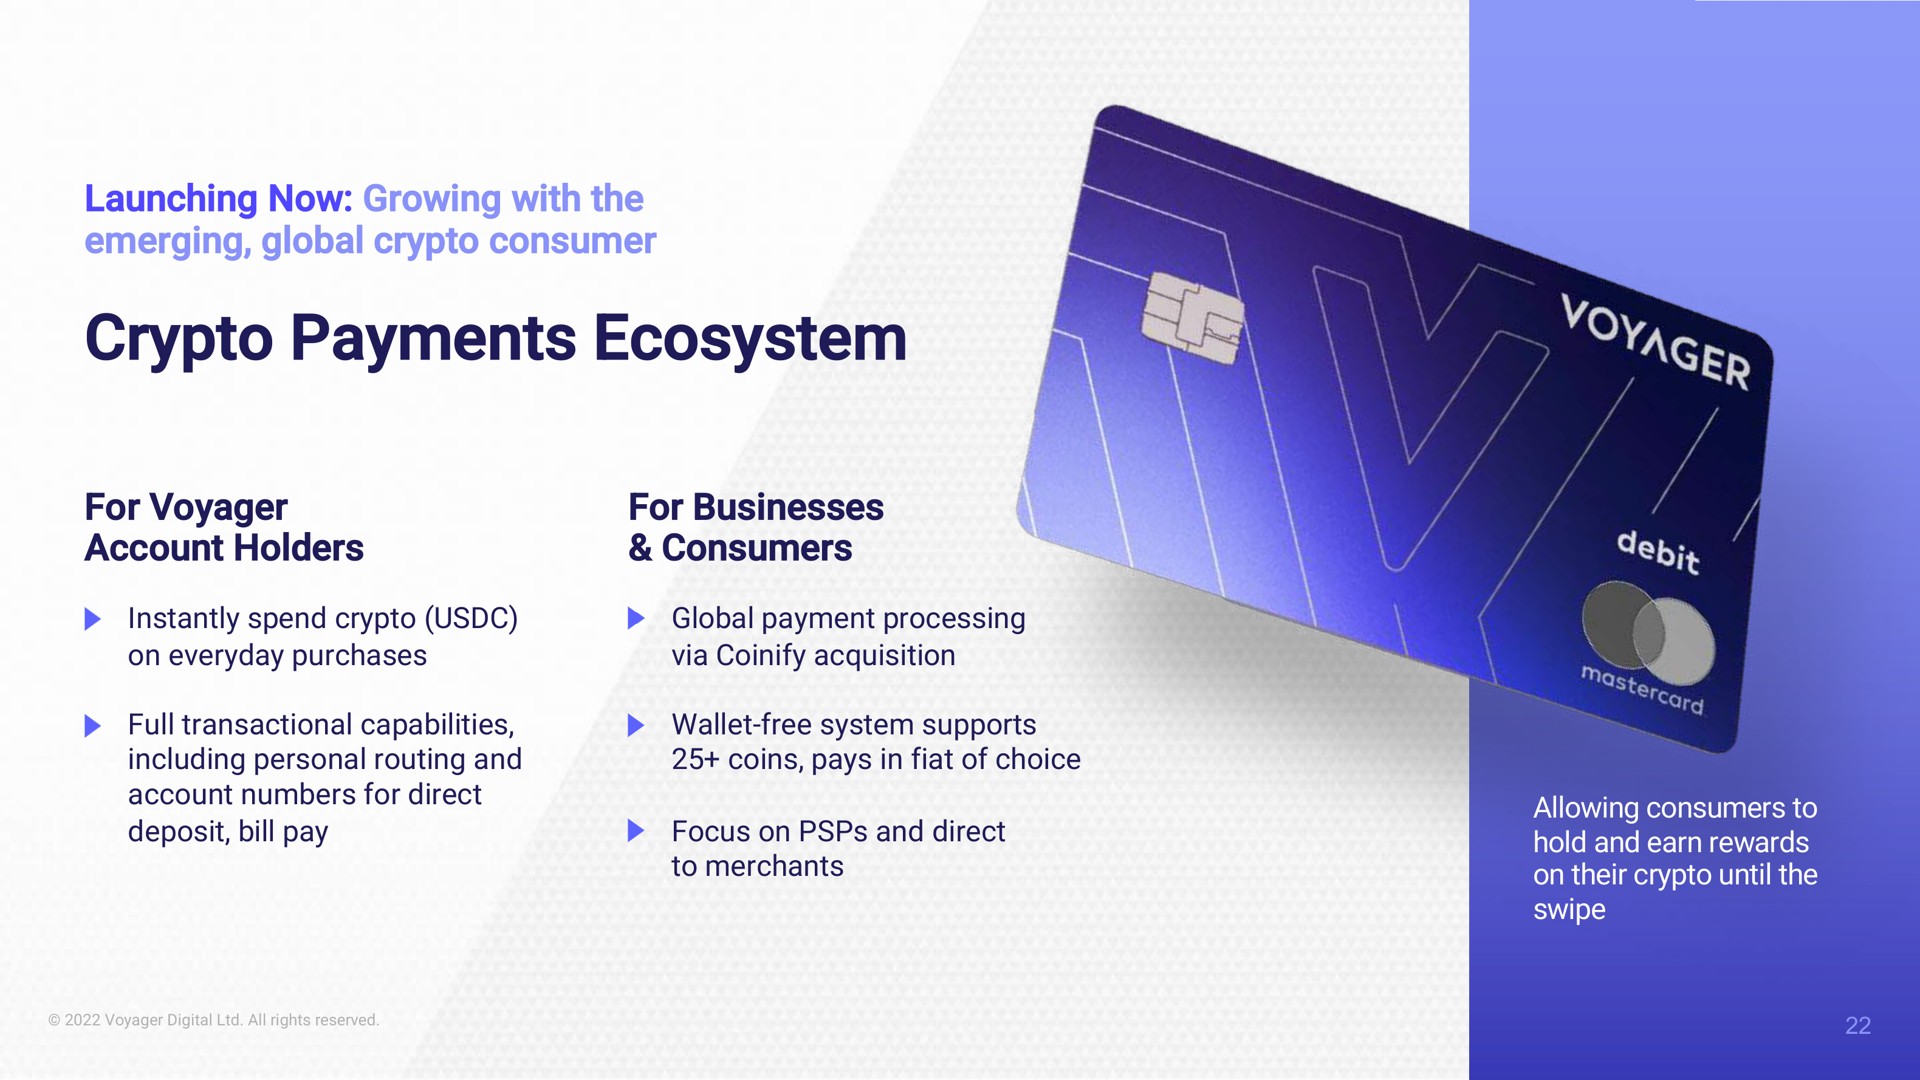 launching now growing with the emerging global consumer payments ecosystem for voyager account holders for businesses consumers to merchants eon a mare | Voyager Digital